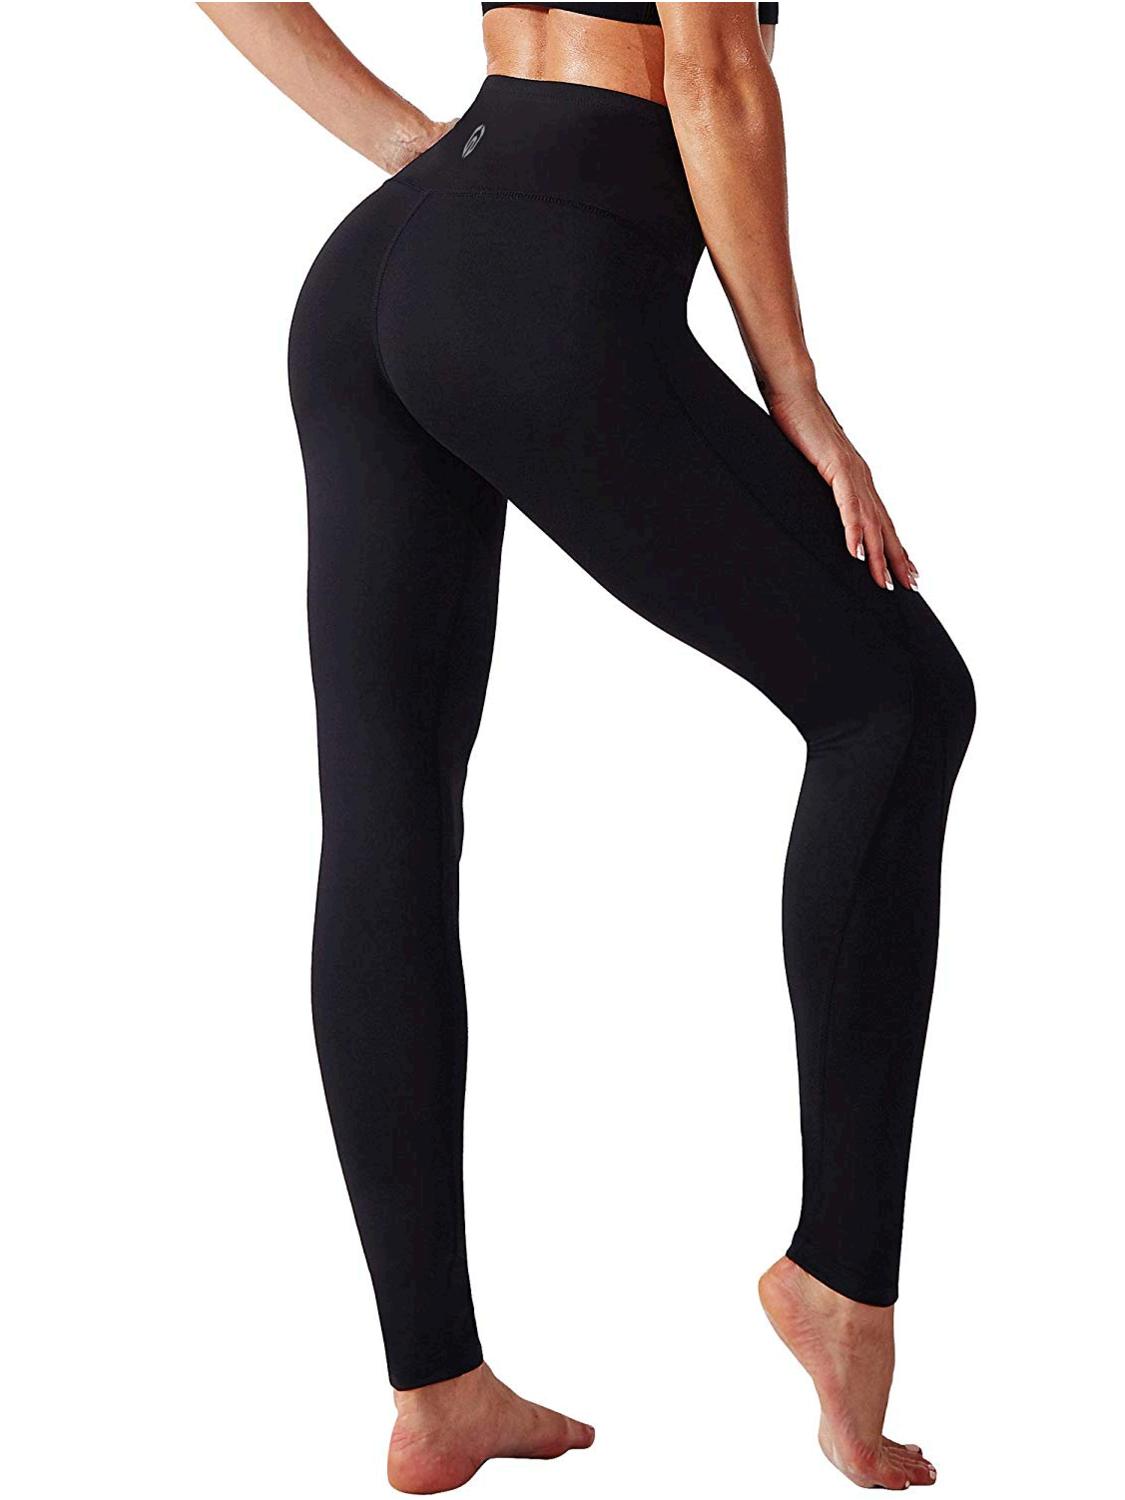 UUE 25Inseam Black Workout leggins high waisted,black workout Yoga pants  with inner pockets for women 